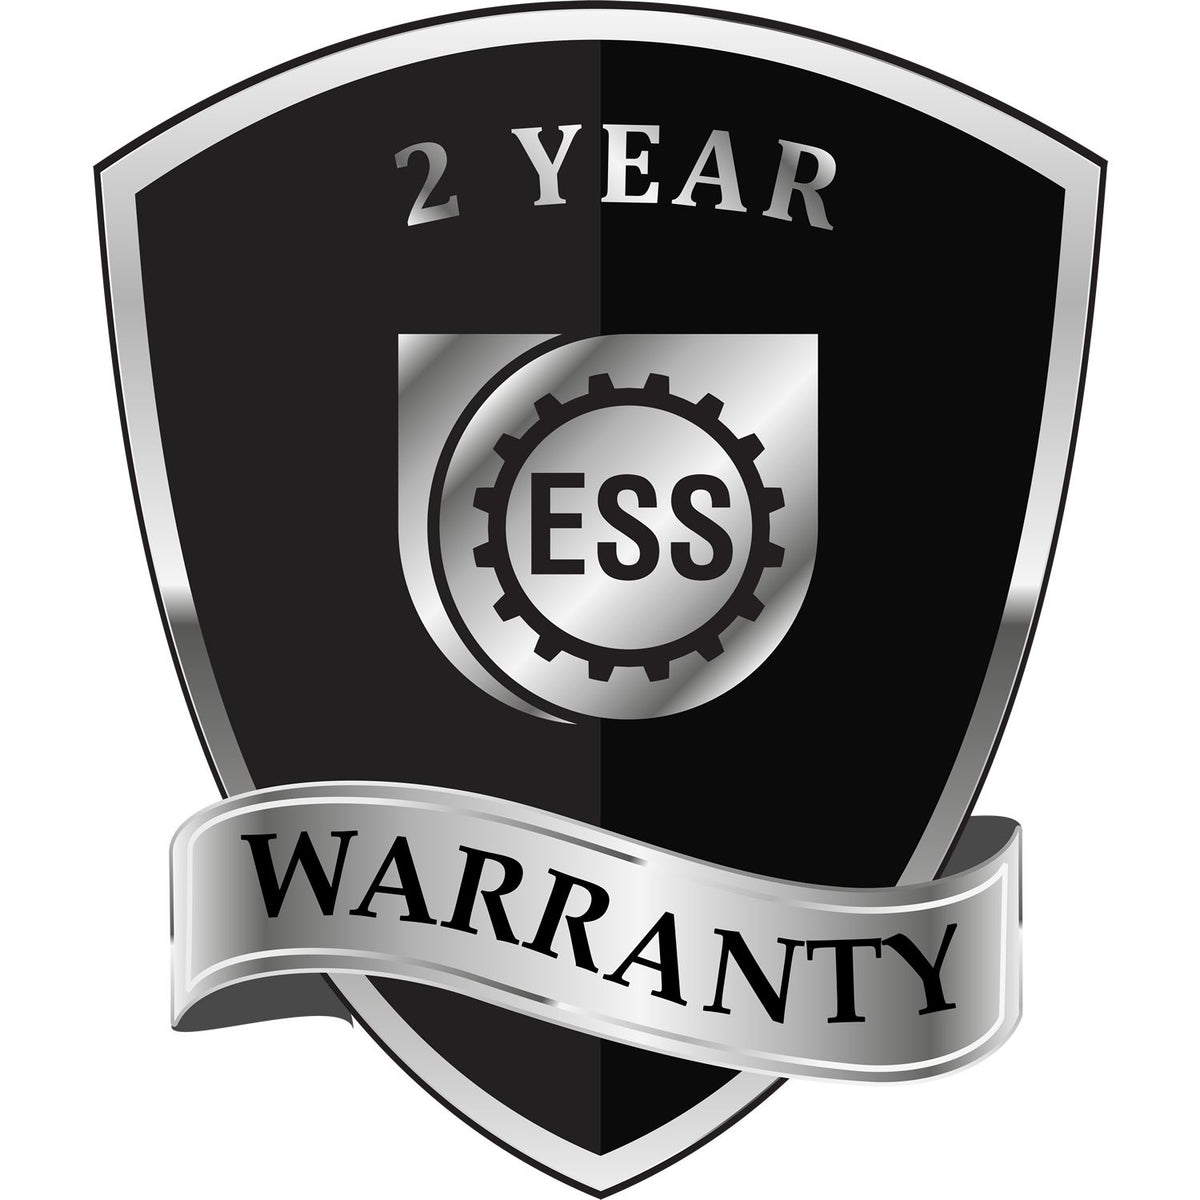 A black and silver badge or emblem showing warranty information for the Heavy Duty Cast Iron West Virginia Geologist Seal Embosser